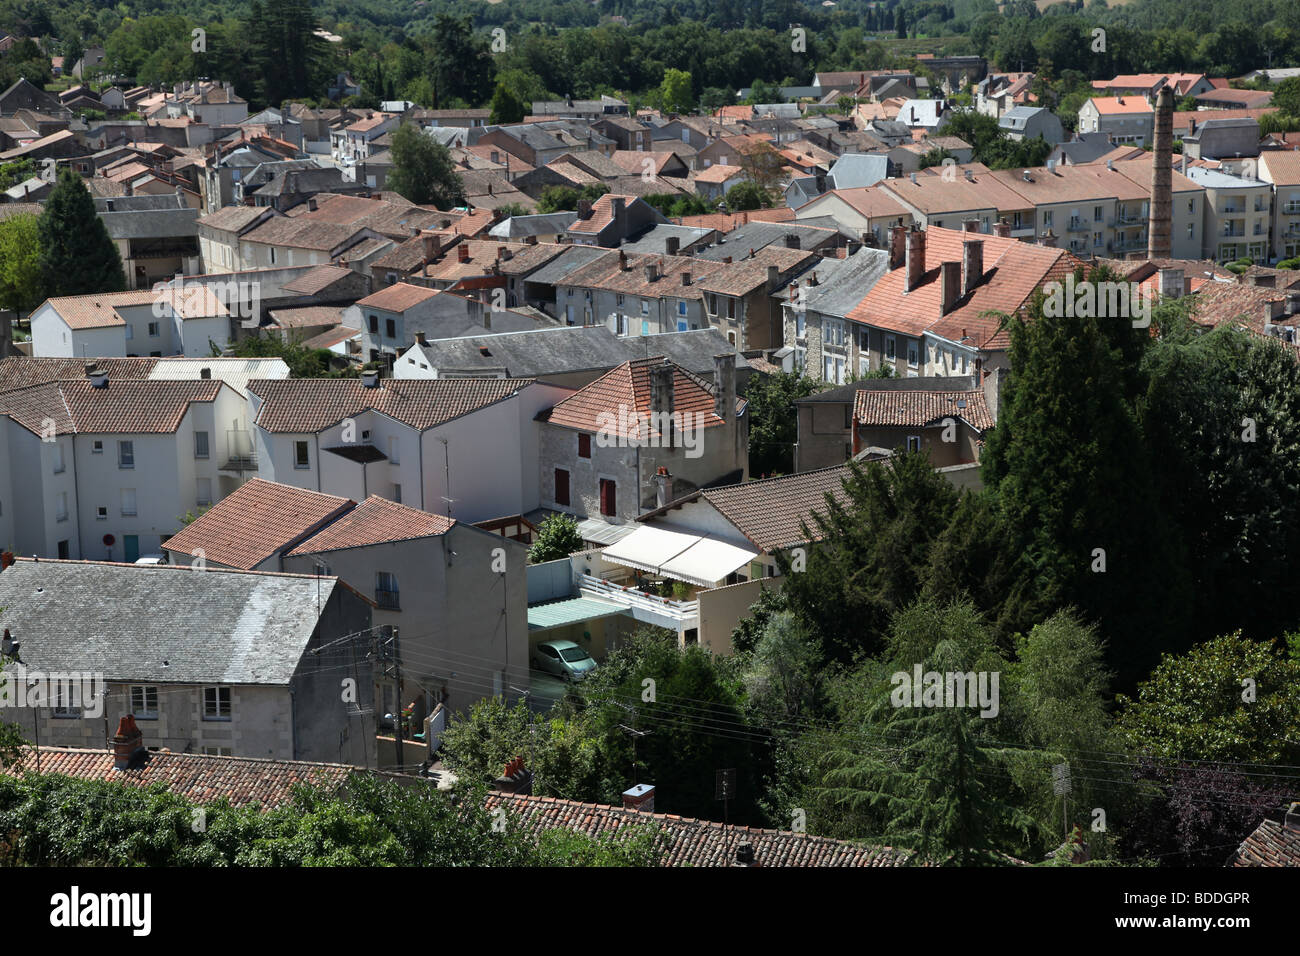 An Aerial view of Chauvigny, Vienne,Poitou-Charentes, France. Stock Photo